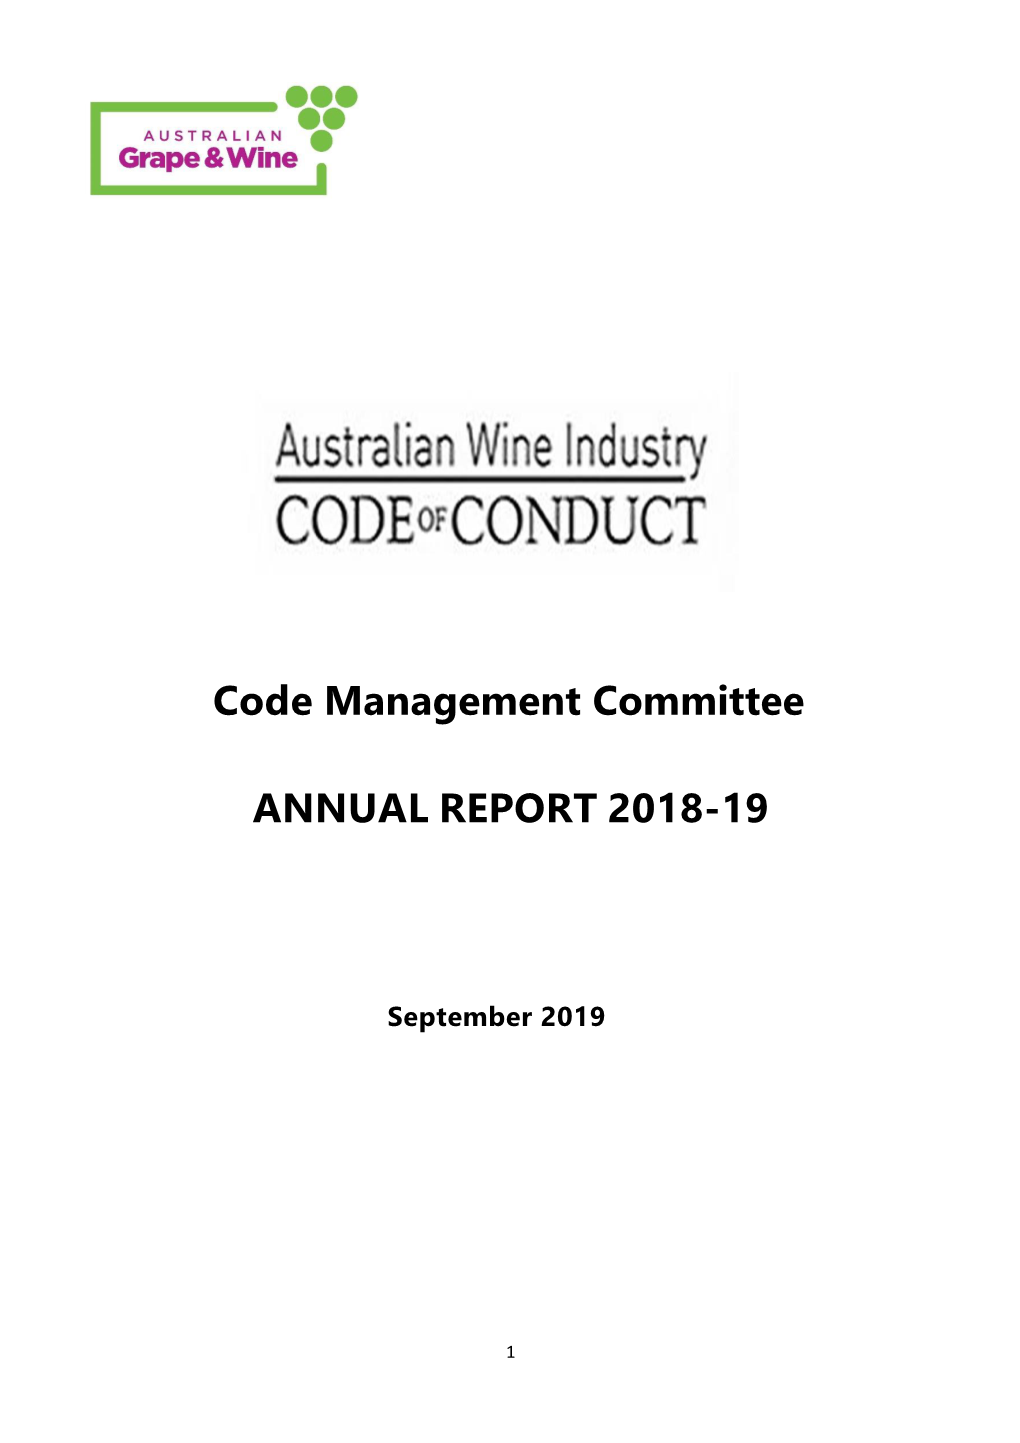 Code Management Committee ANNUAL REPORT 2018-19